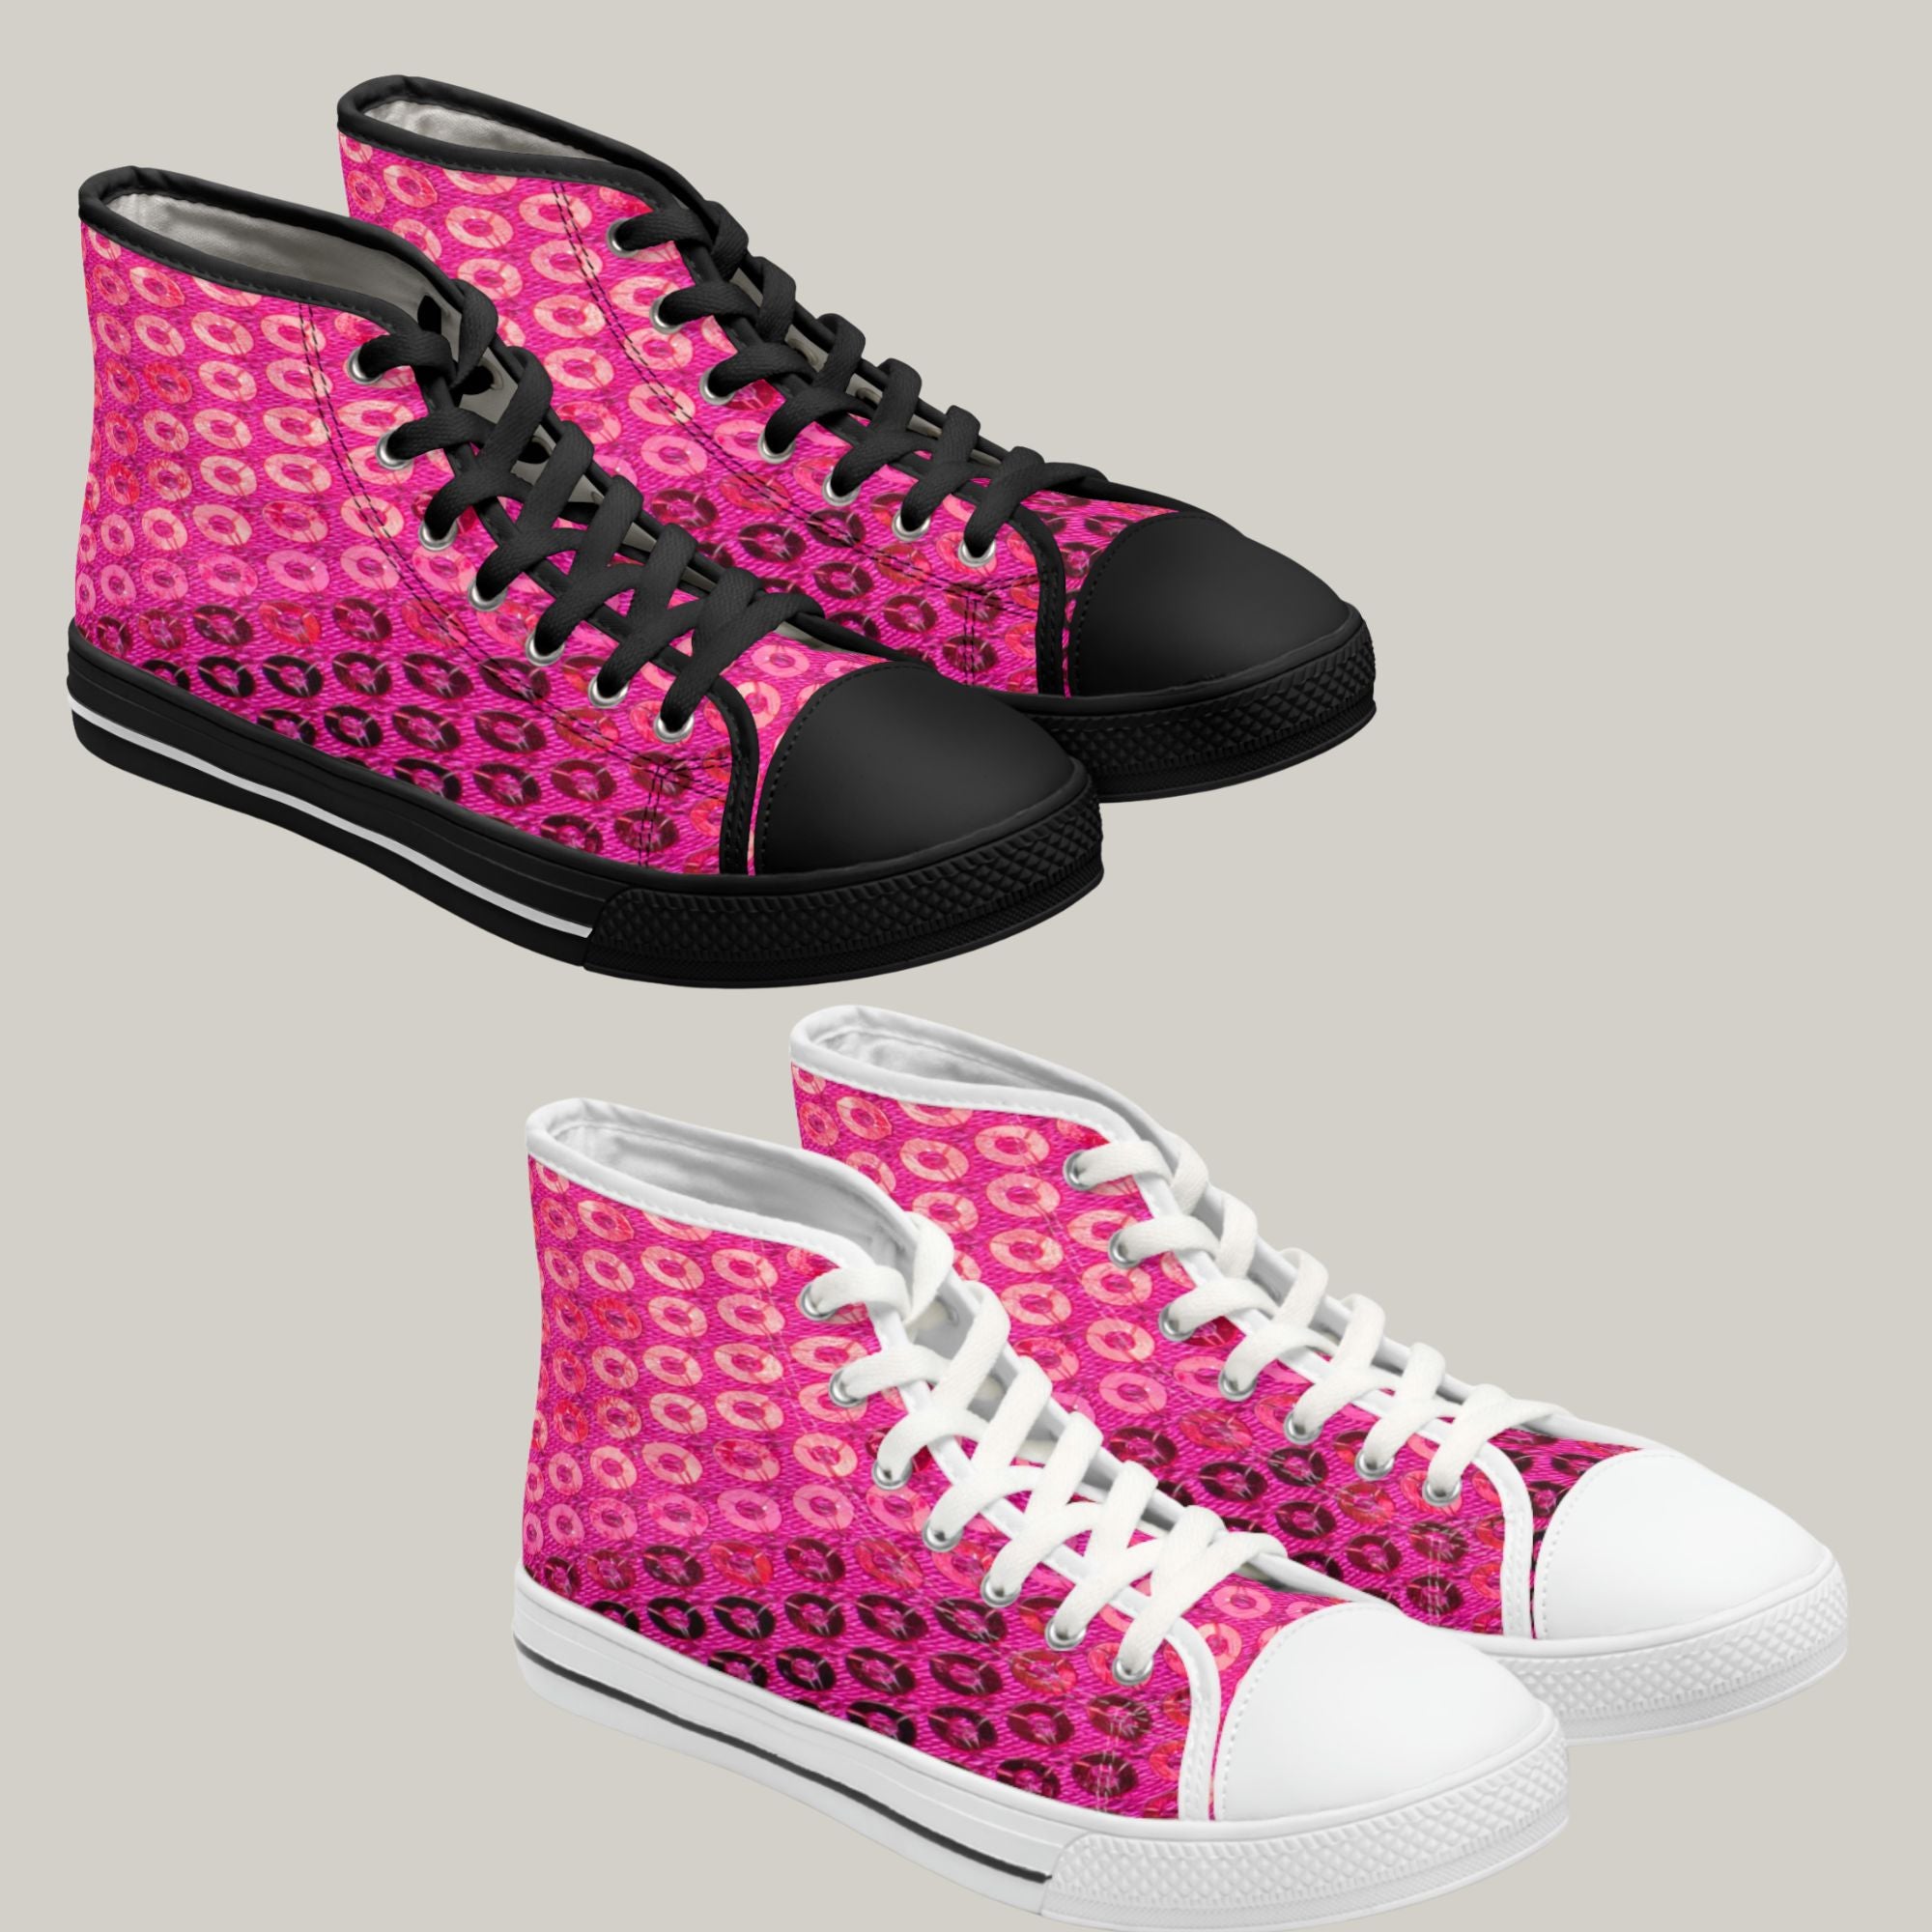 HOT PINK SEQUIN PRINT - Women's High Top Sneakers Black and White Soles